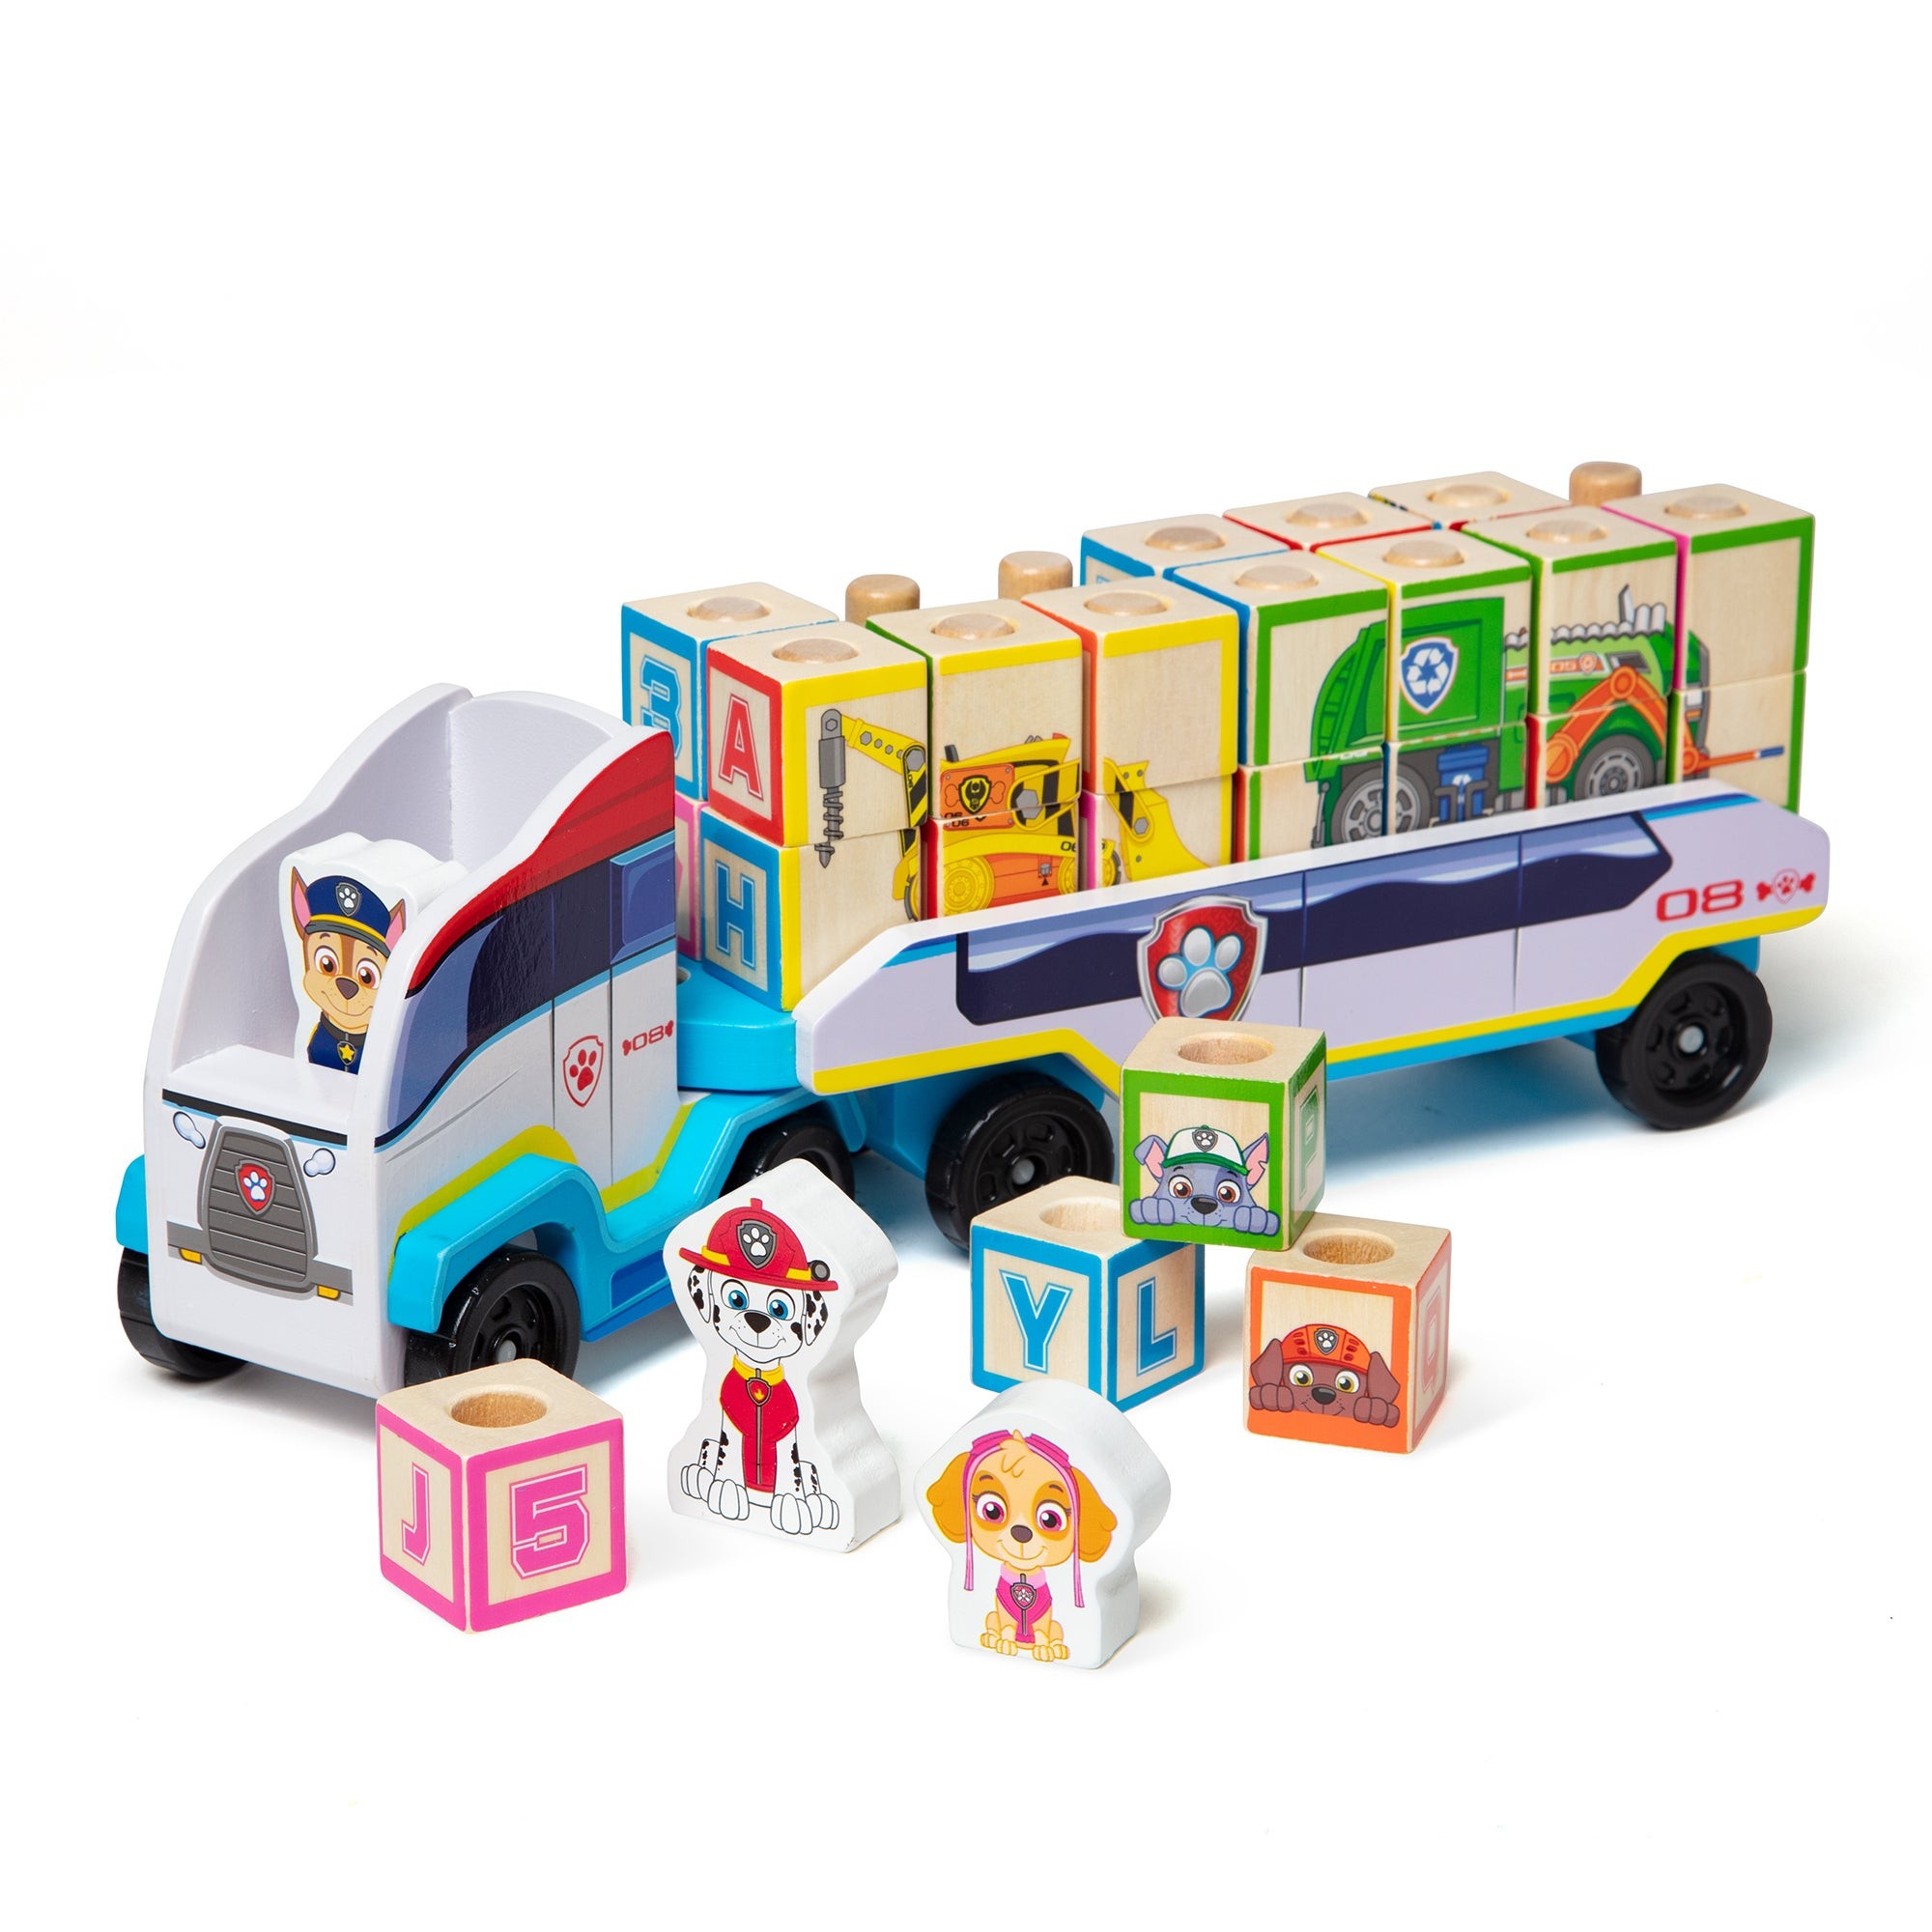 Paw Patrol Wooden ABC Block Truck Ages 3+ Years